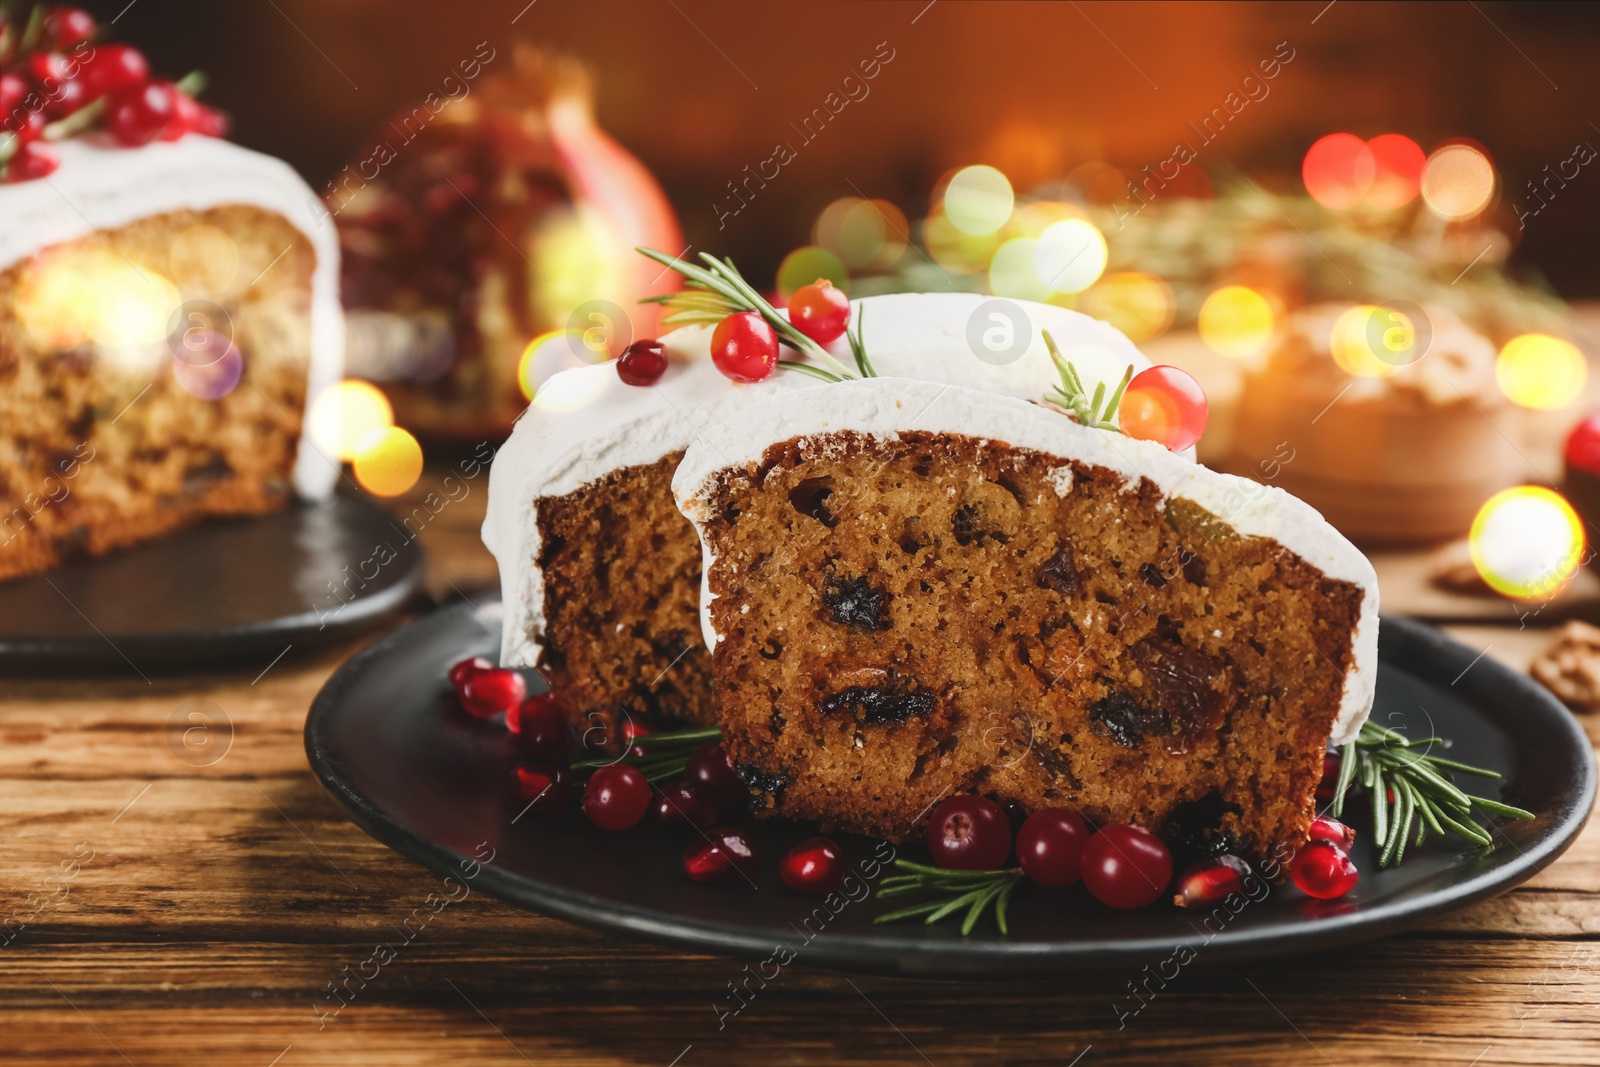 Image of Traditional classic Christmas cake decorated with cranberries, pomegranate seeds and rosemary on wooden table